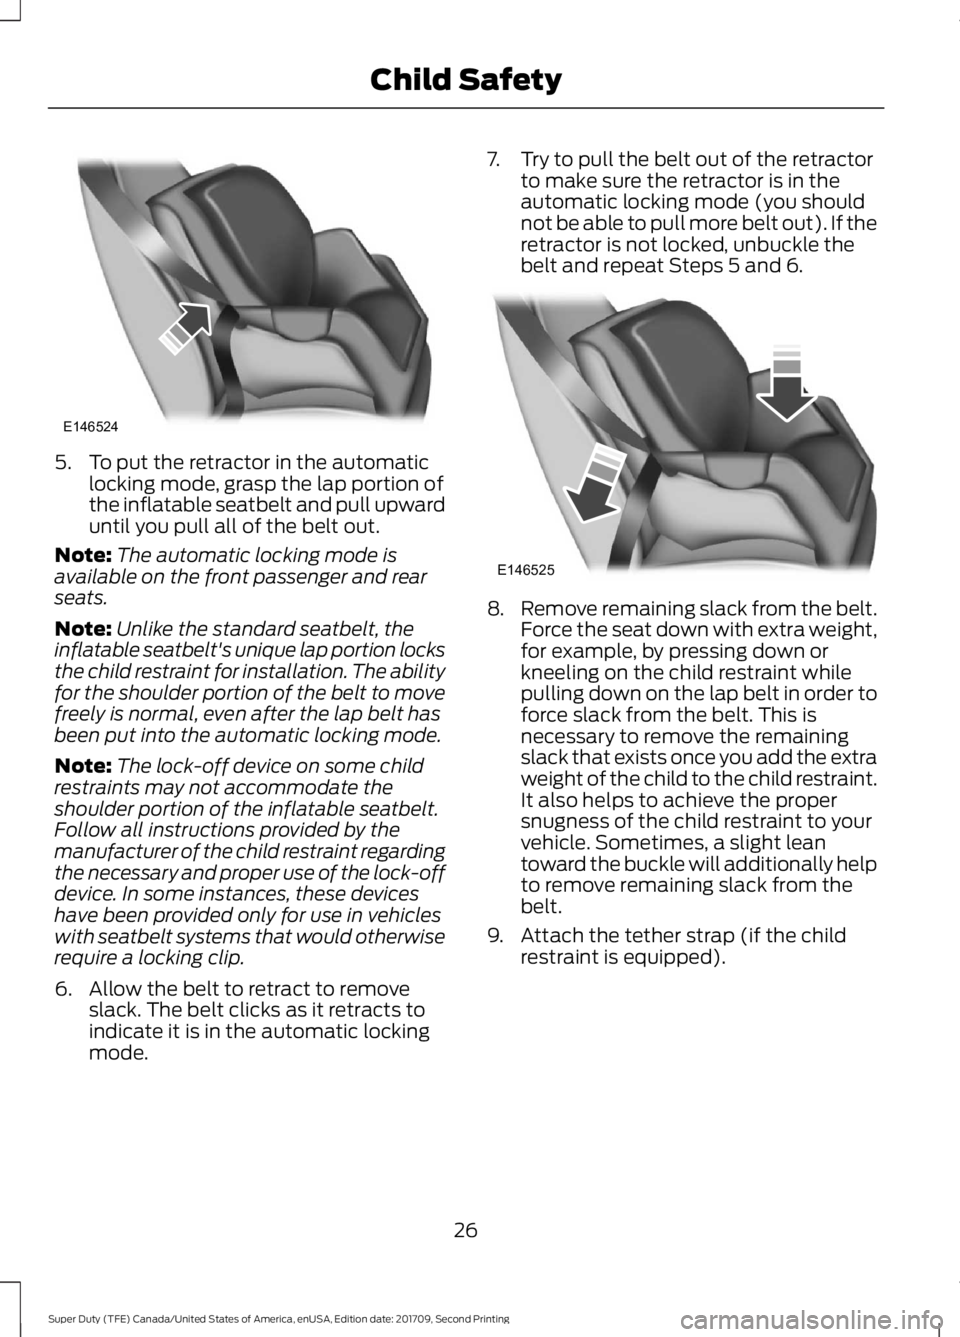 FORD F-450 2018  Owners Manual 5. To put the retractor in the automatic
locking mode, grasp the lap portion of
the inflatable seatbelt and pull upward
until you pull all of the belt out.
Note: The automatic locking mode is
availabl